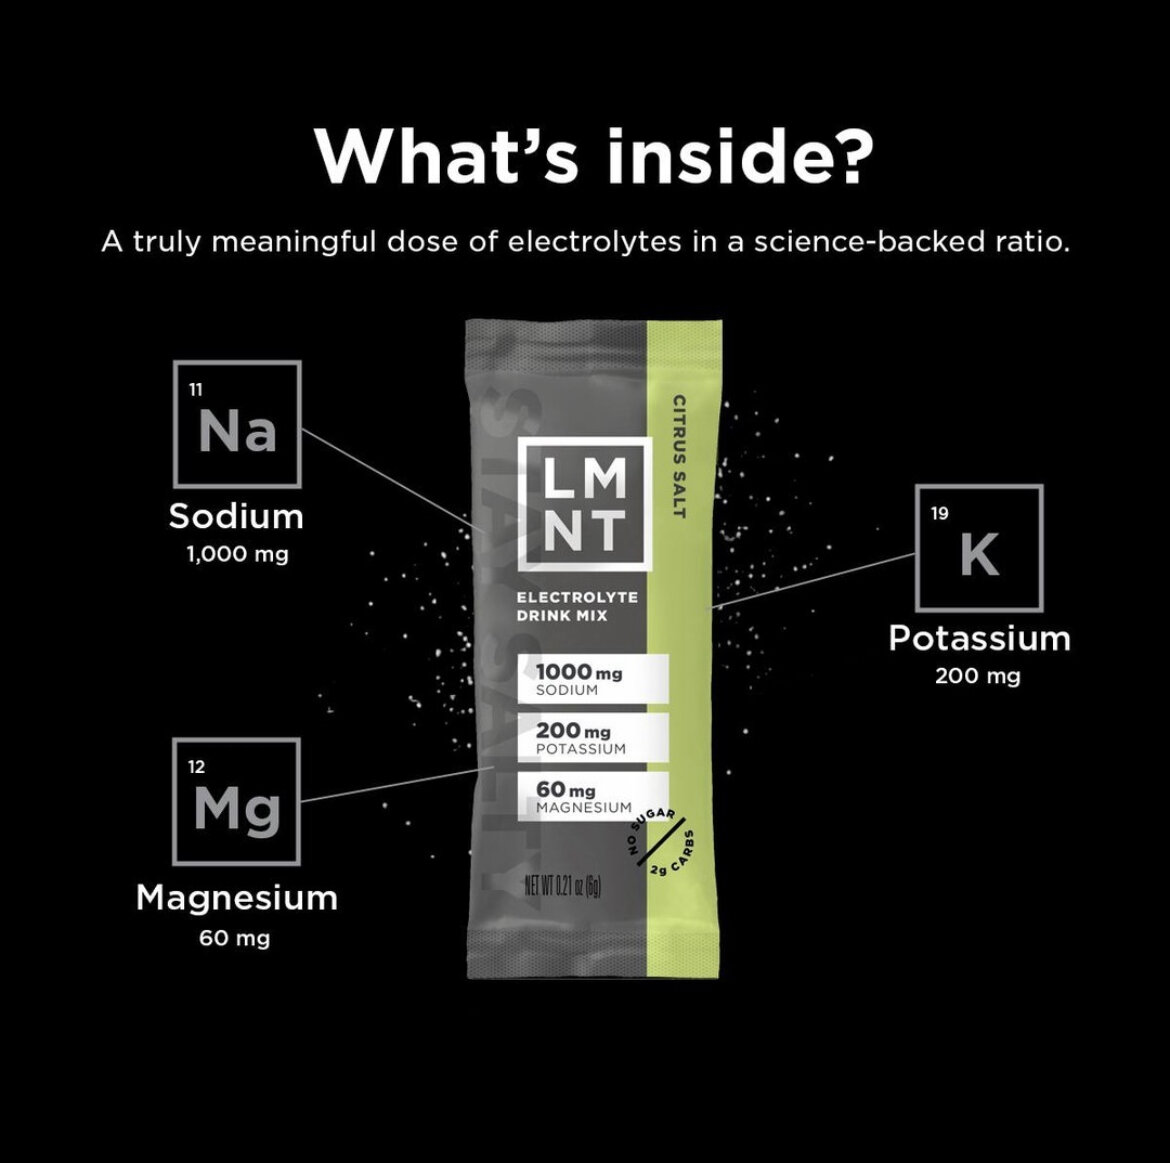 We're making sure everyone stays hydrated on Camp Yoga weekend with @drinklmnt electrolytes! 💦

**REPOST**

LMNT&rsquo;s electrolyte ratios explained: Spark notes edition ⚡⁠
⁠
1000mg Sodium⁠
Most people need 4-6 grams of sodium per day for optimal h